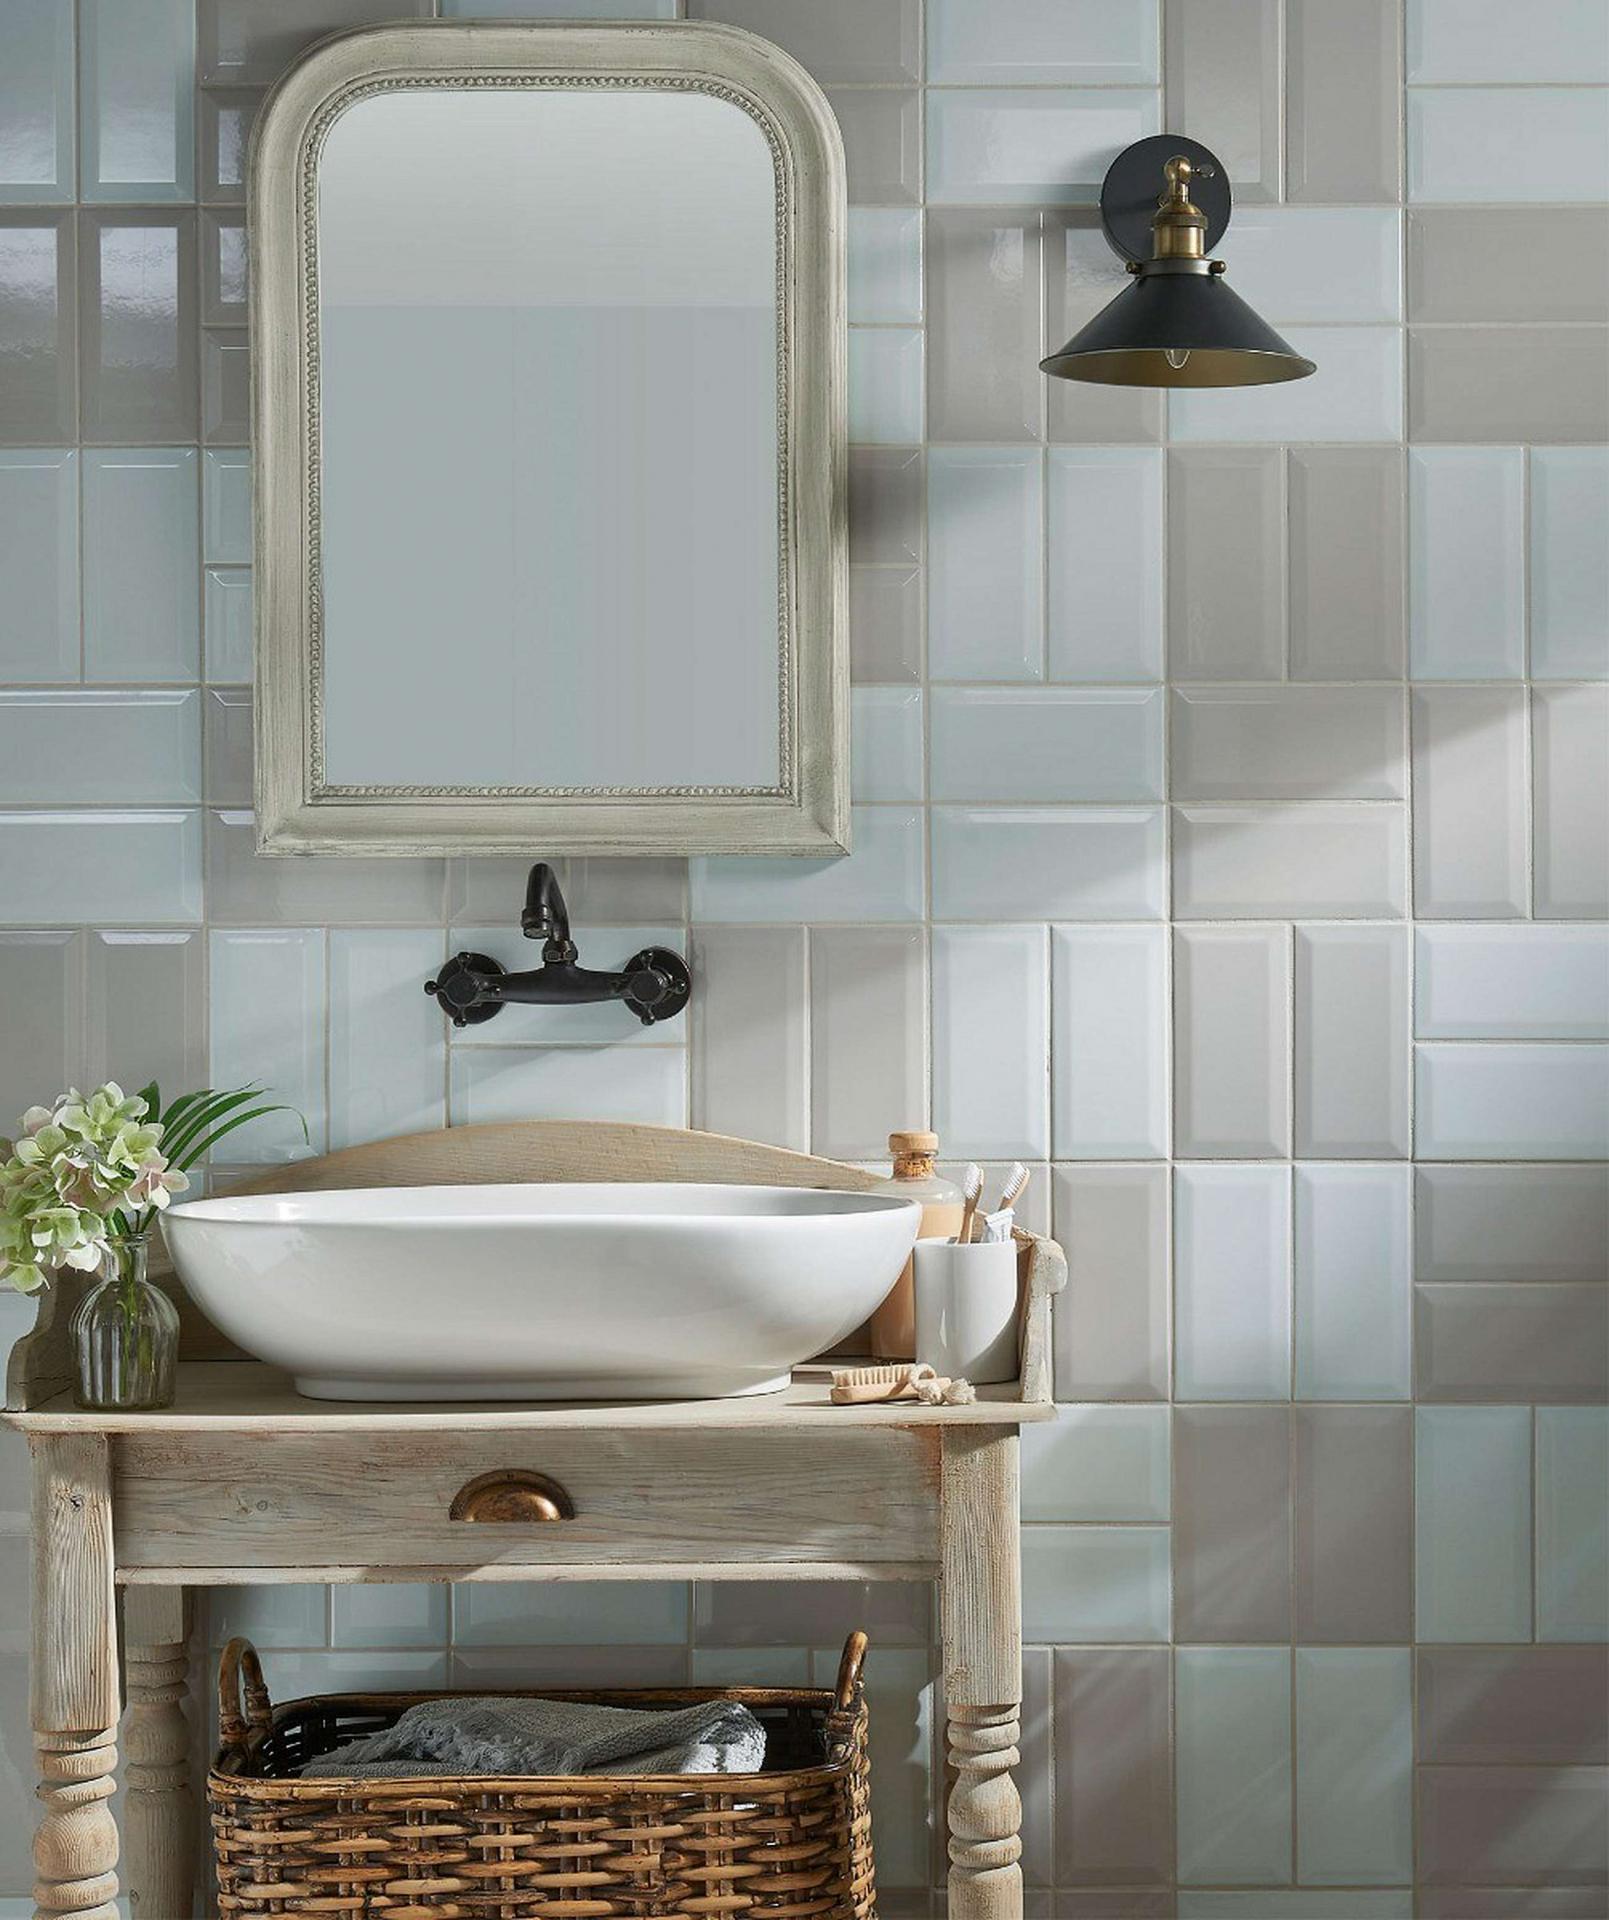 3 Ways to Make Classic Tiles Look Modern and Stylish